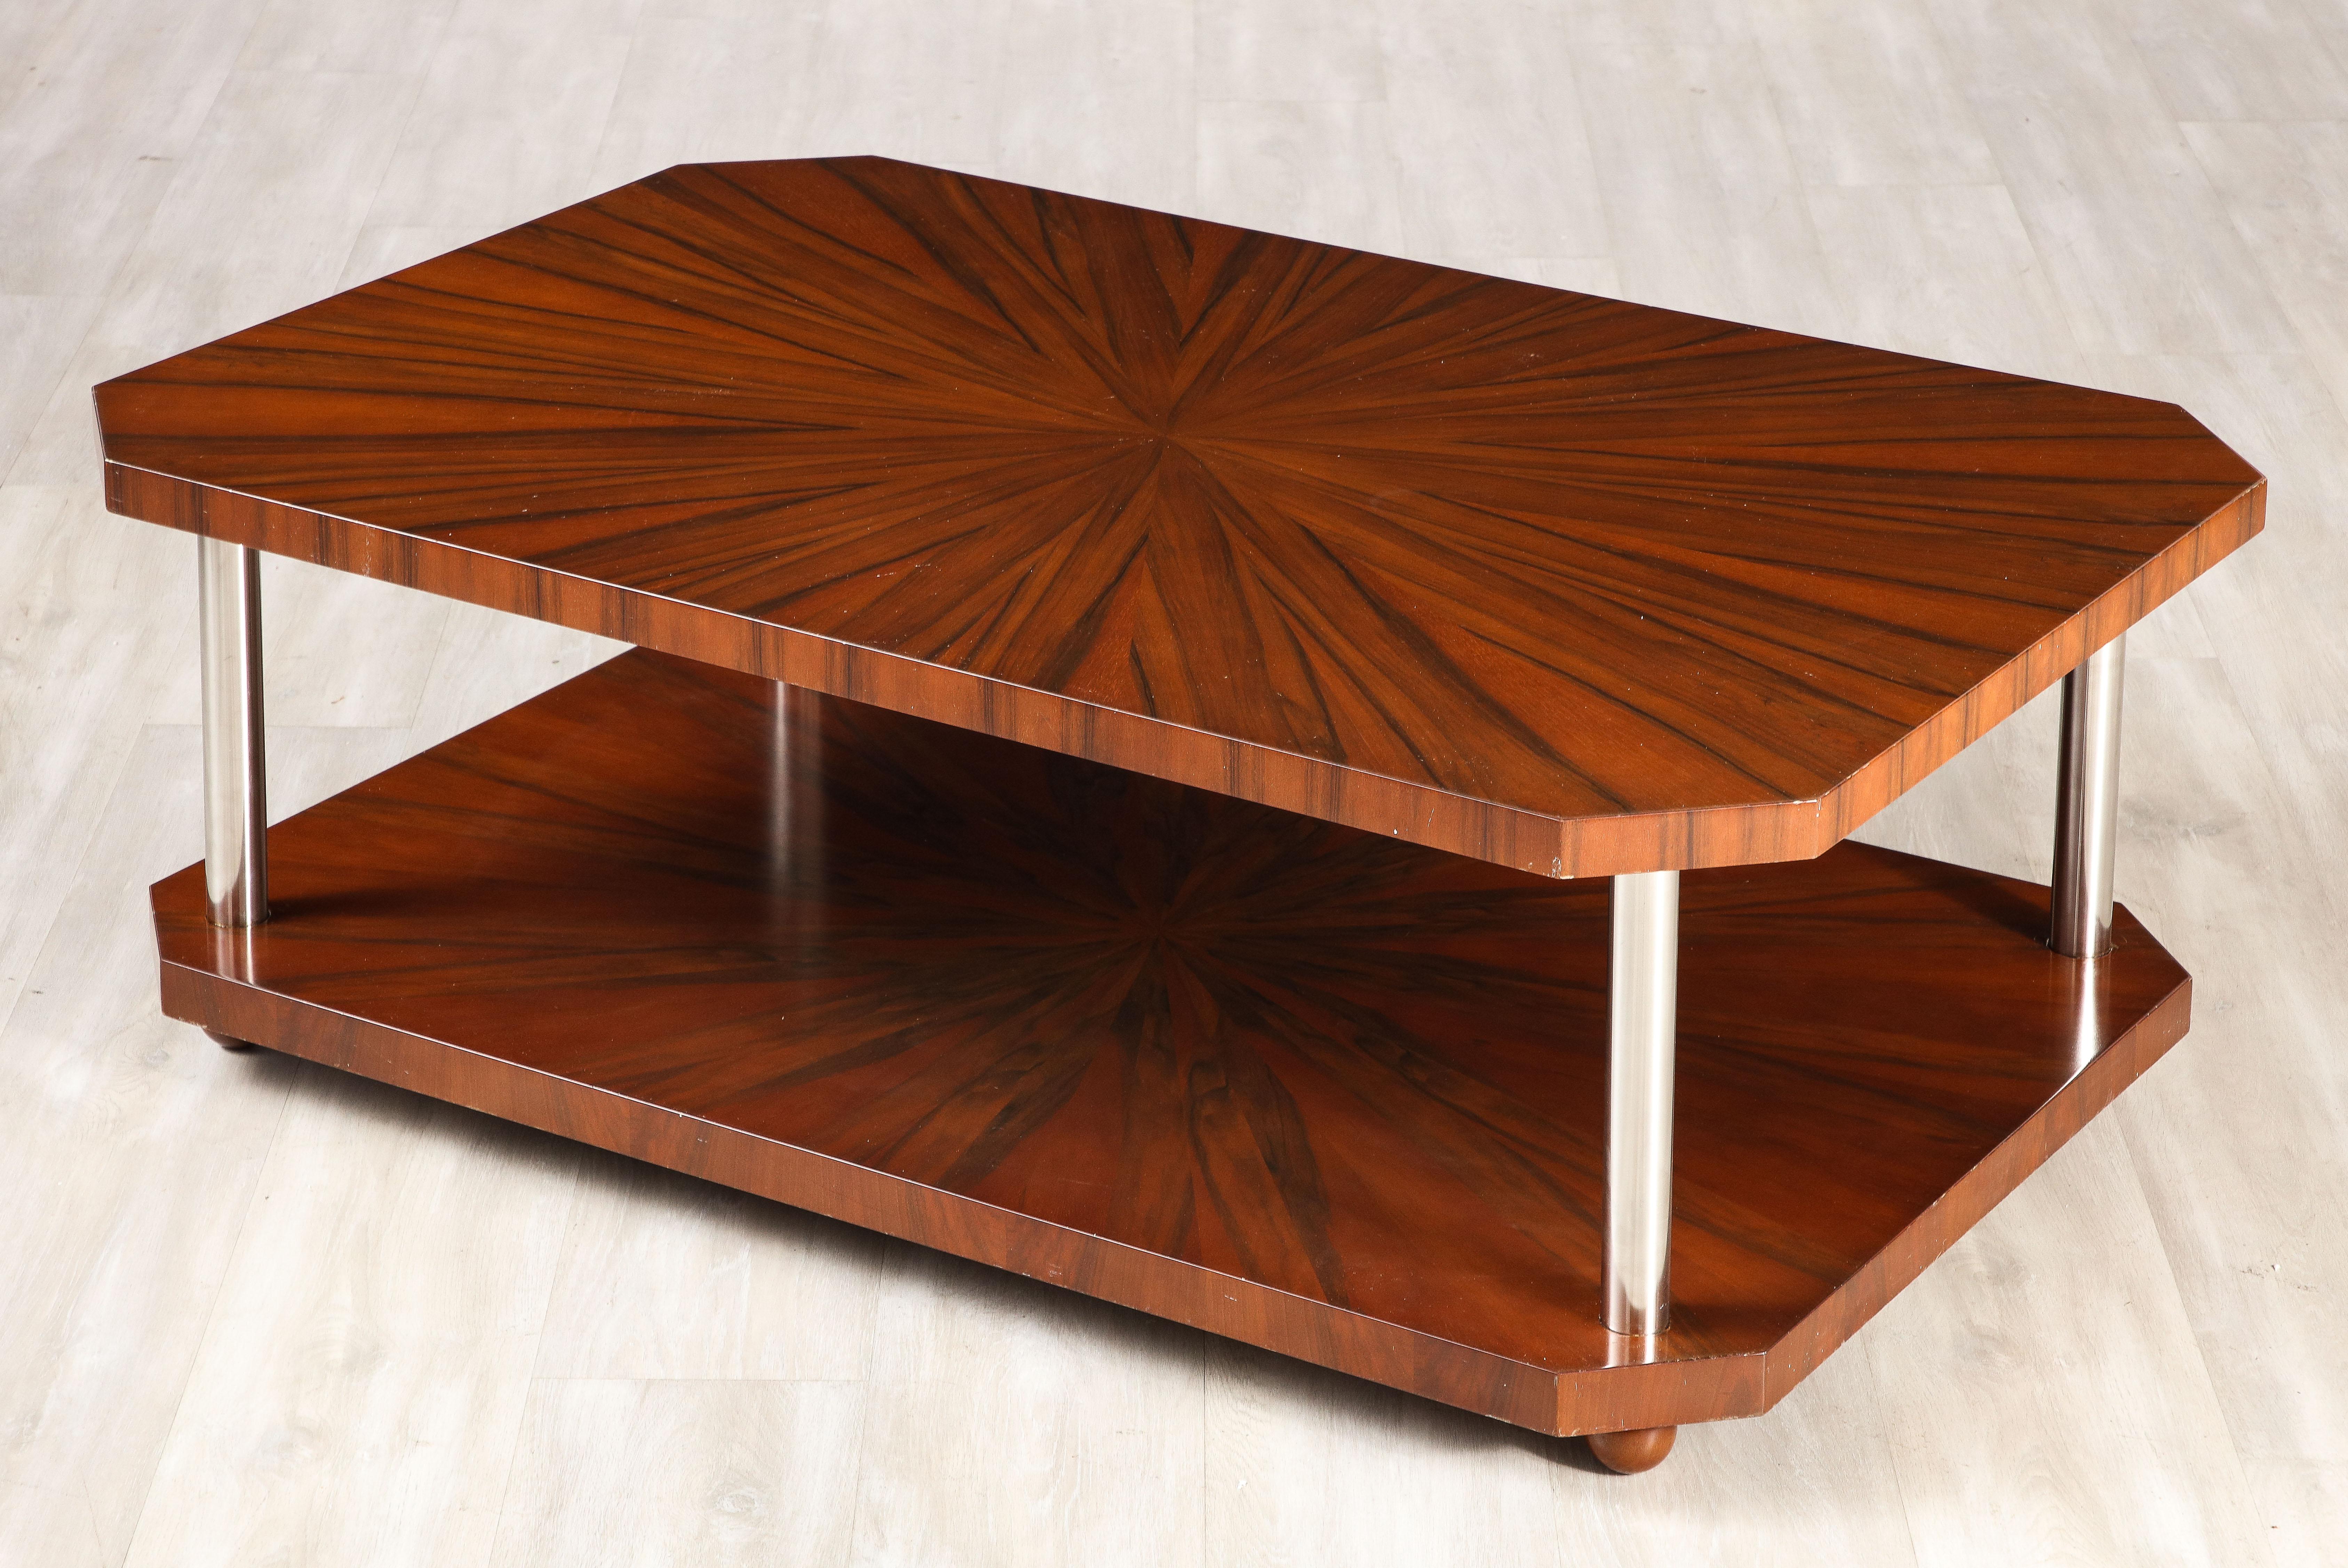 French Art Deco Rectangular Wood Coffee Table, circa 1940  For Sale 2